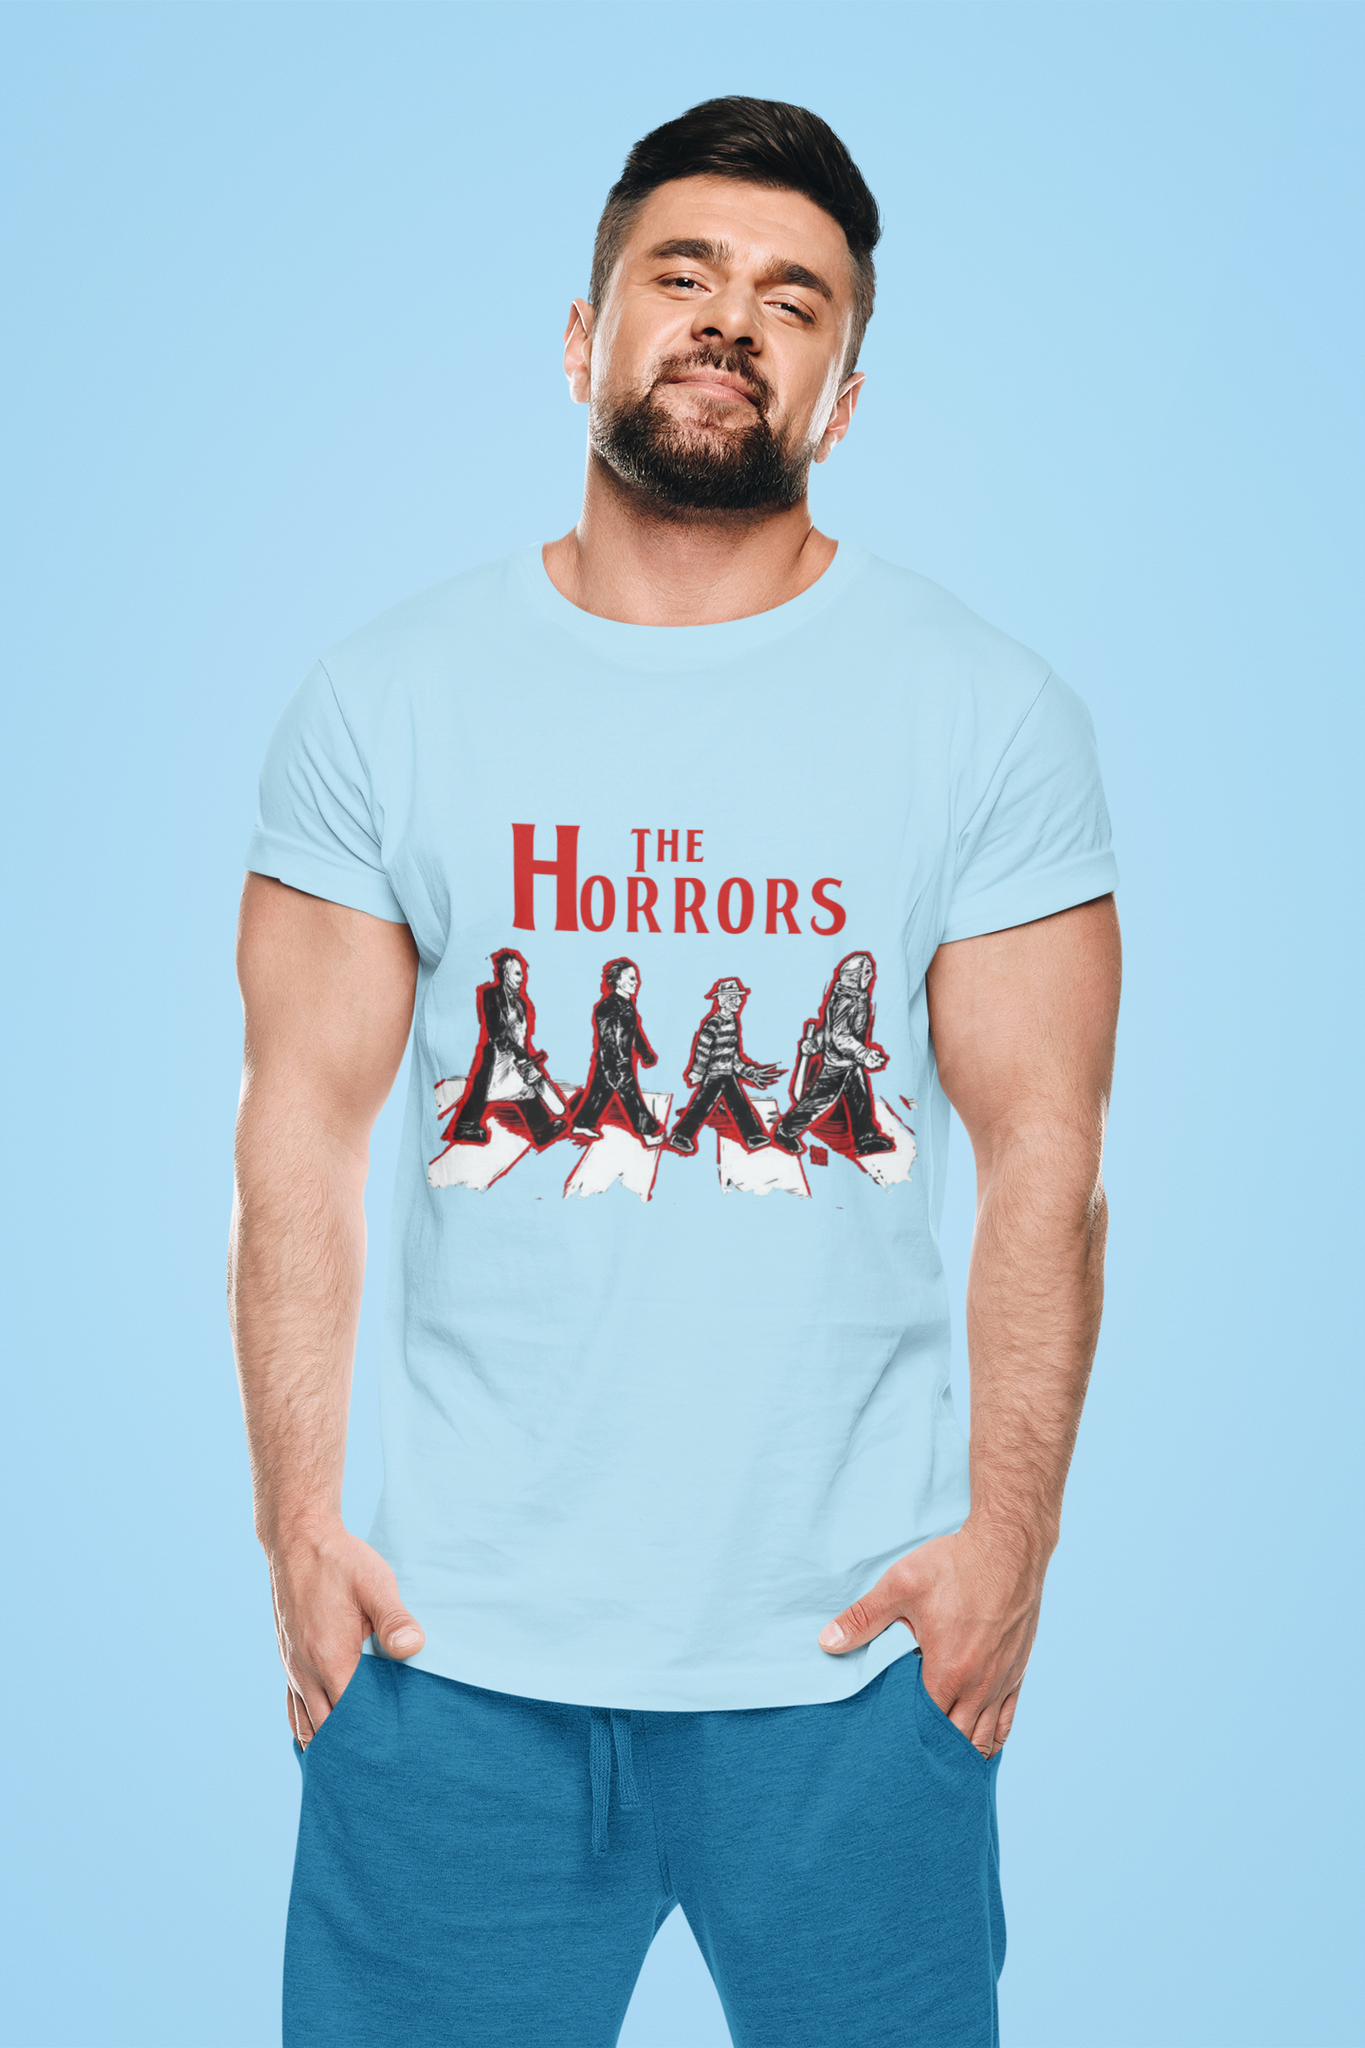 Horror Movie Characters T Shirt, The Horrors Abbey Road Tshirt, Leatherface Myers Krueger Voorhees T Shirt, Halloween Gifts